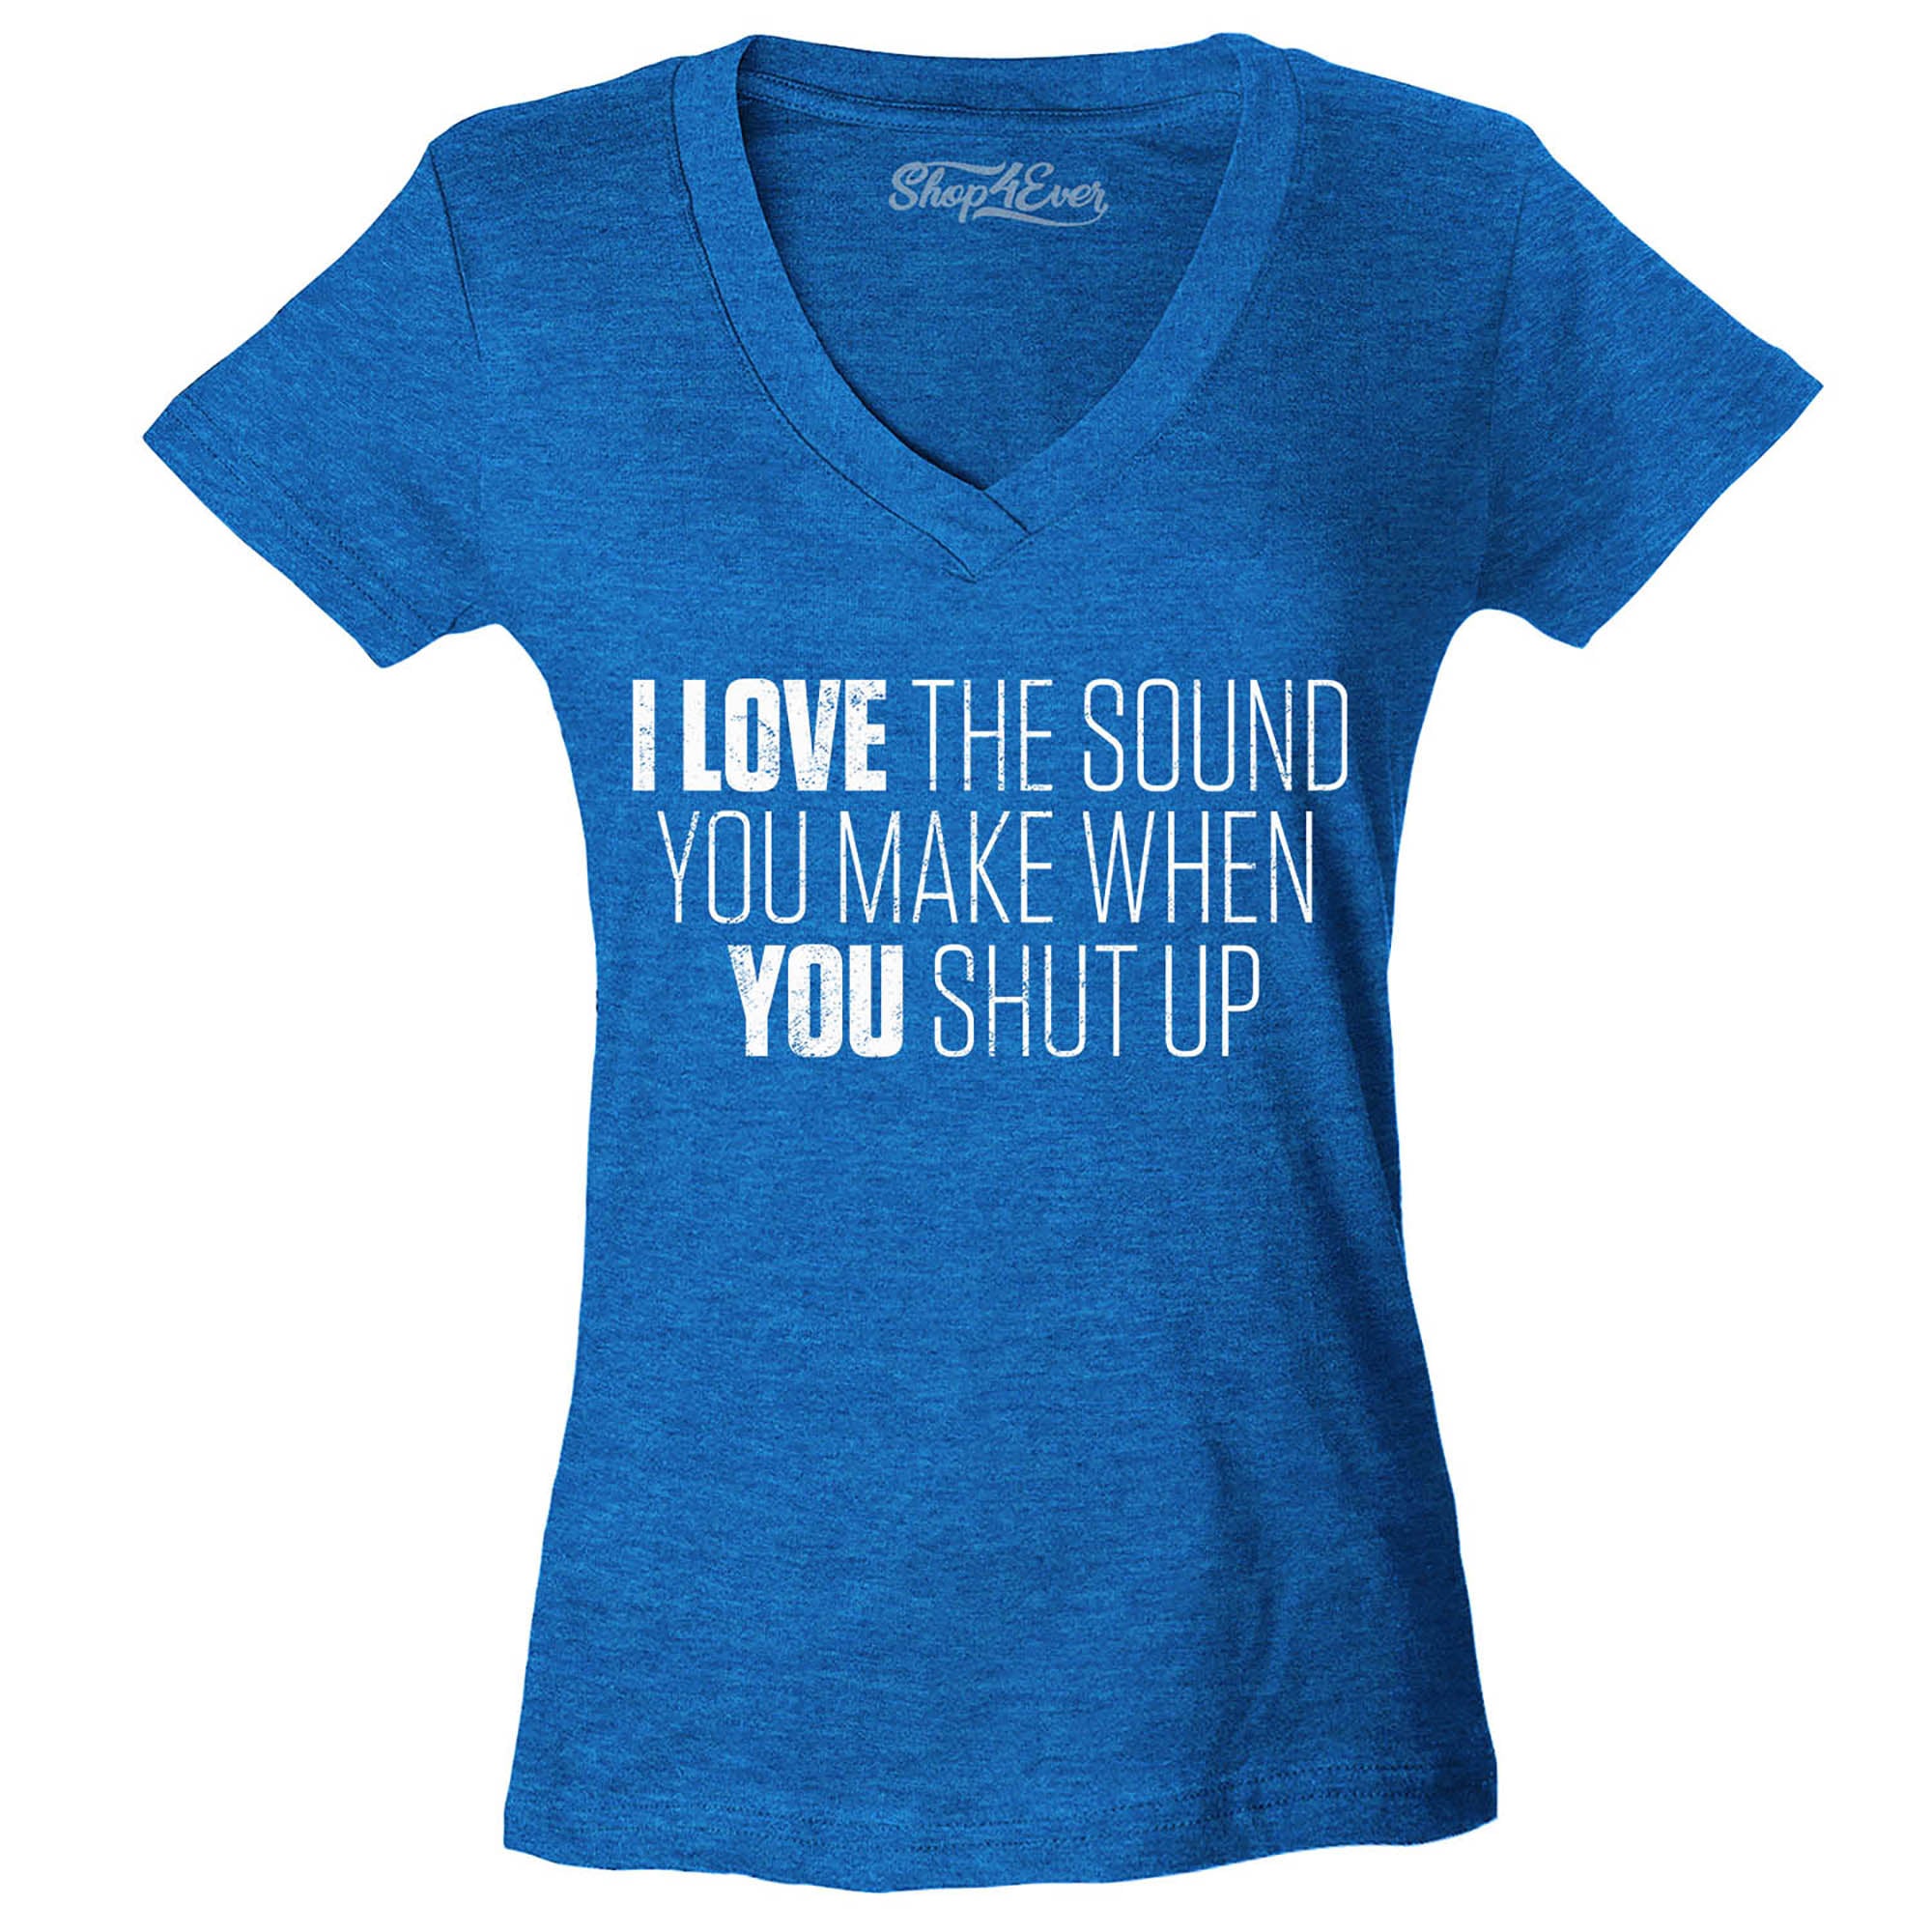 Love The Sounds You Make When You Shut Up Women's V-Neck T-Shirt Slim Fit